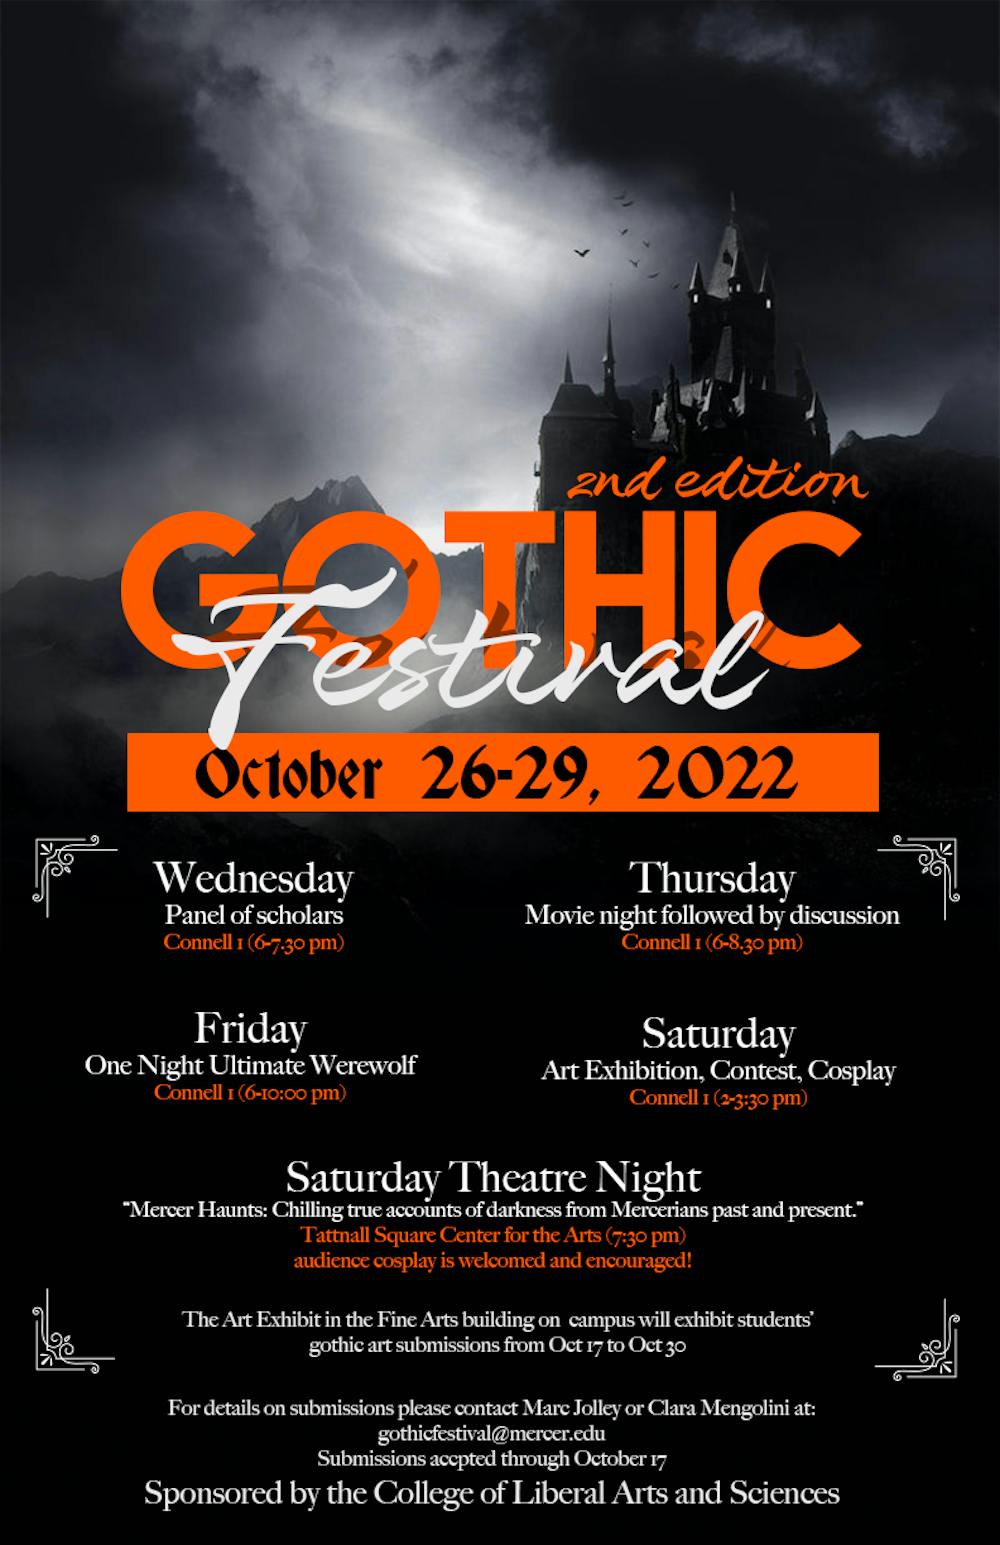 <p>The advertising flyer for the 2022 gothic festival. The 2nd Edition Gothic Festival will run from Oct. 26 at 5:00p.m. until Oct. 29 at 10:00 p.m. Flyer provided with permission by Clara Mengolini.</p>